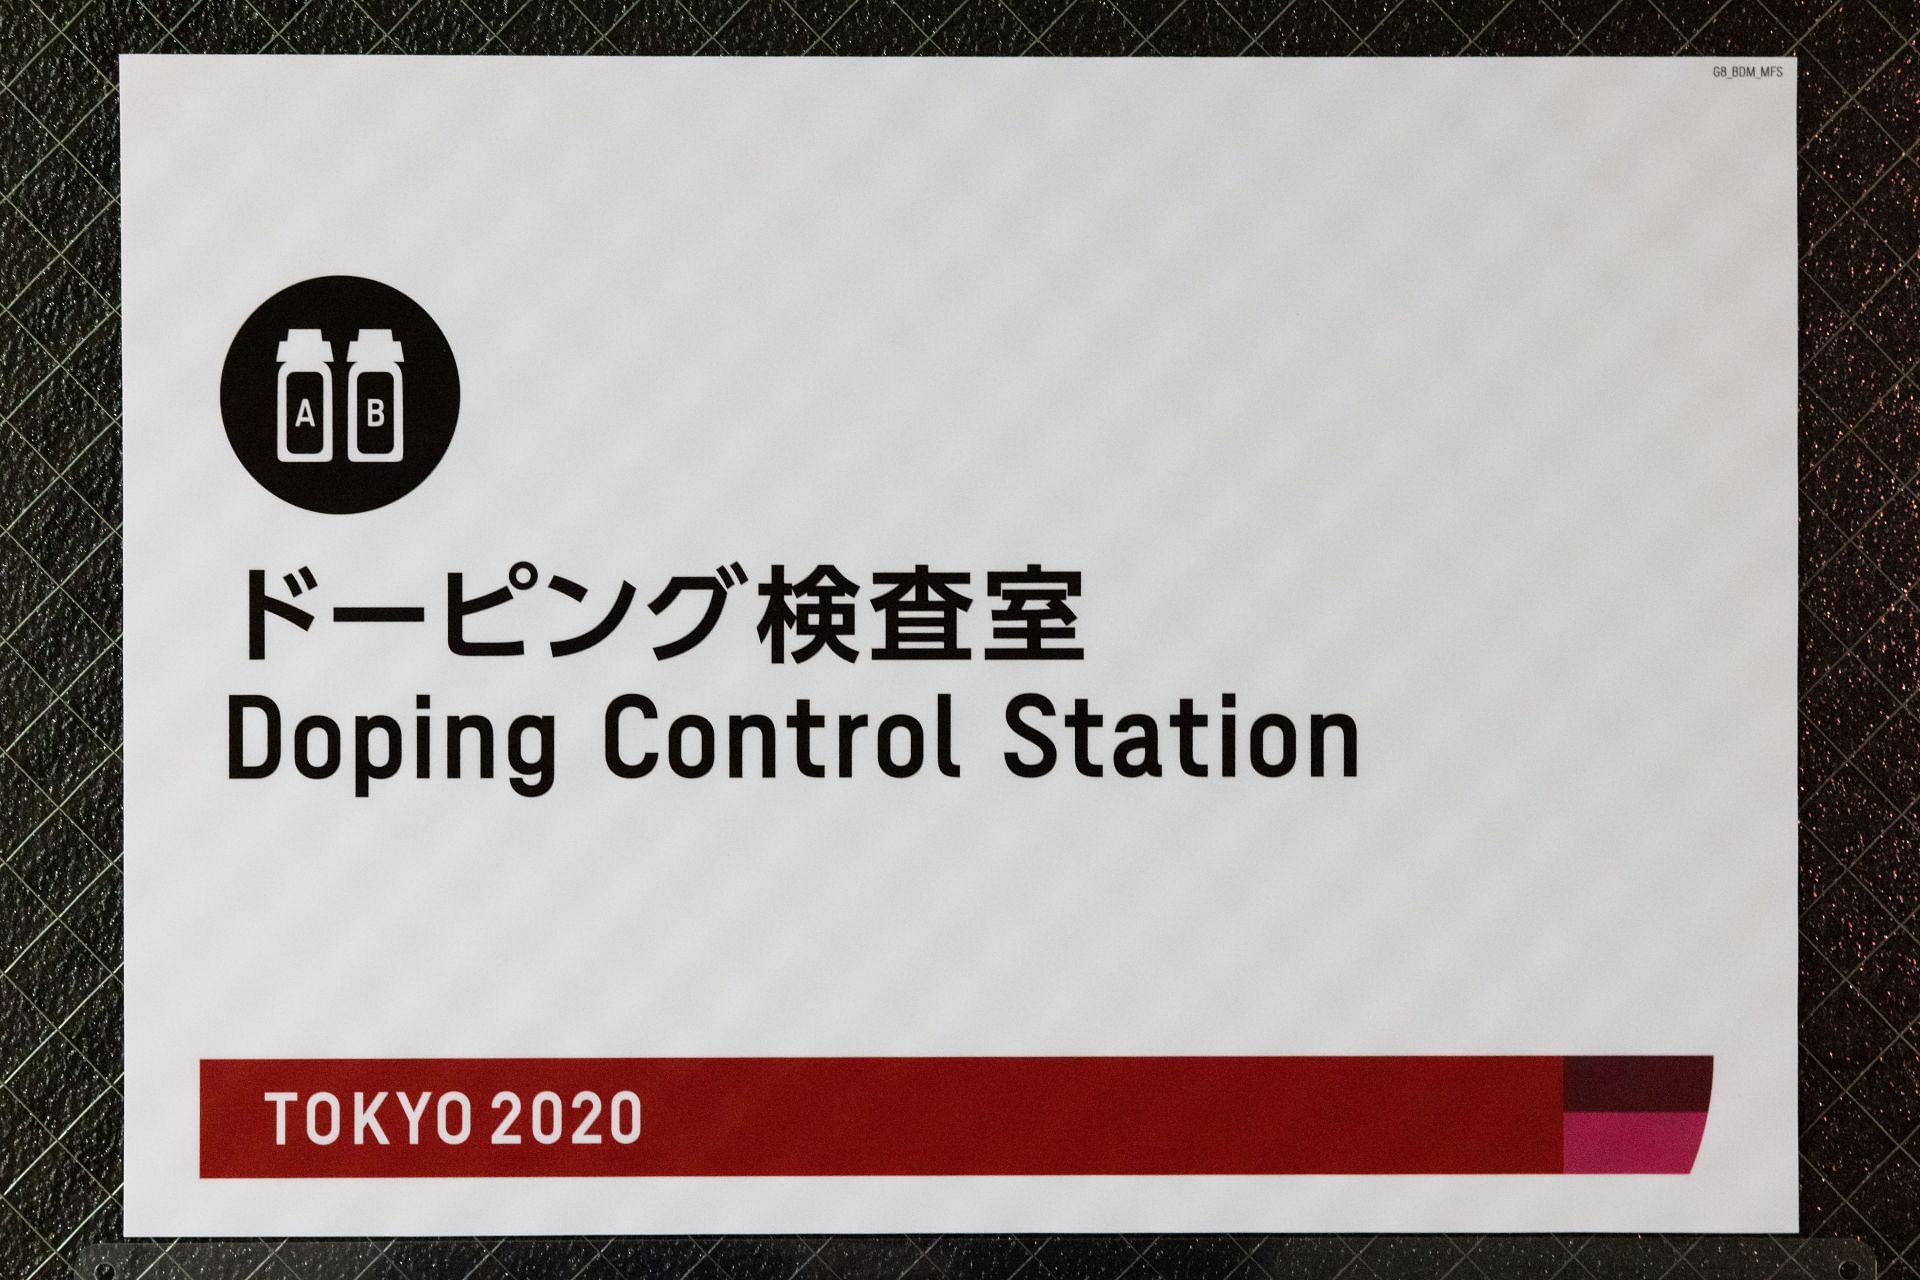 A sign for the Doping Control Station at the Tokyo Olympics